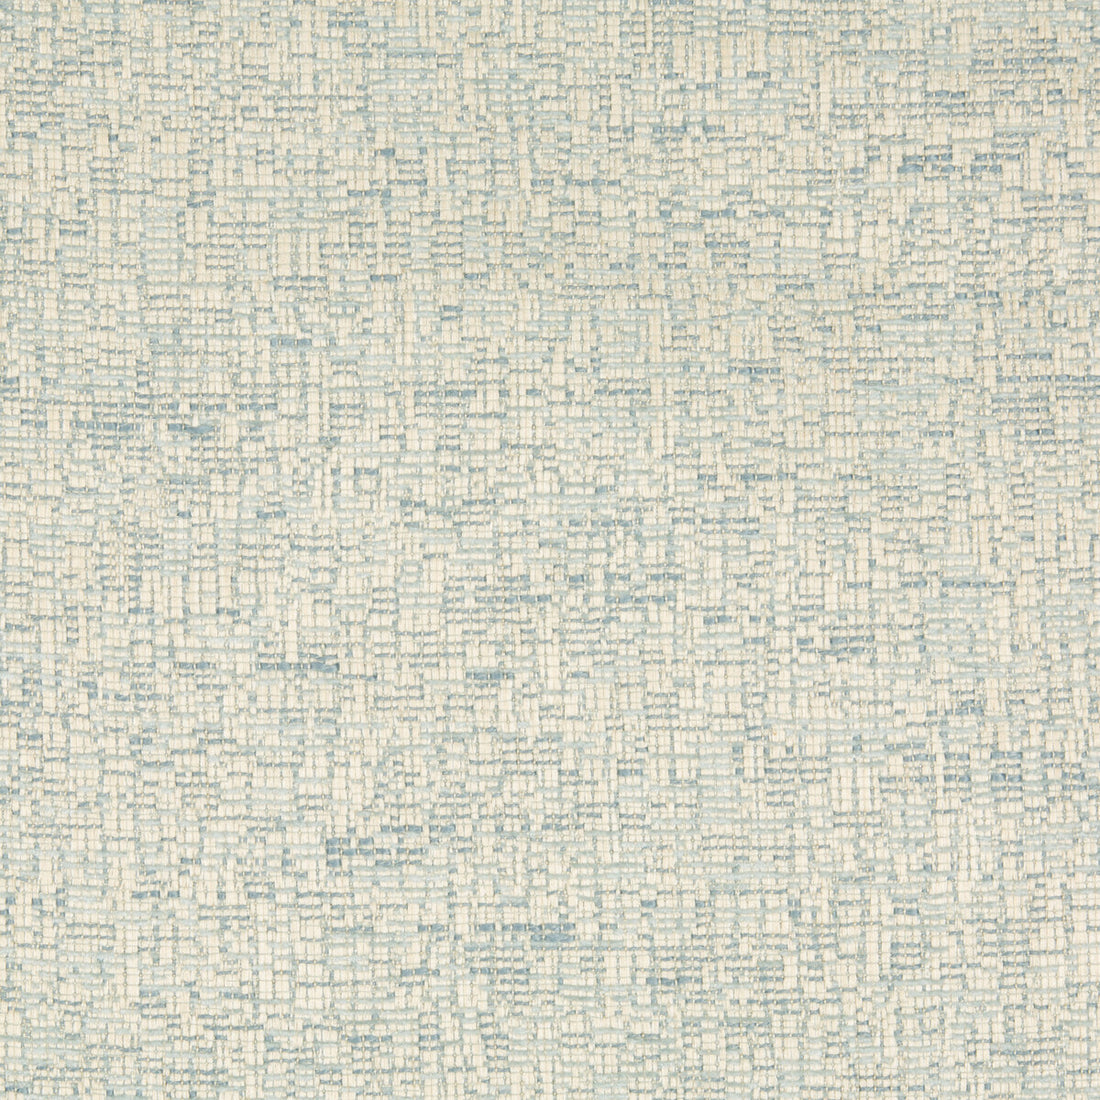 Kravet Contract fabric in 34737-115 color - pattern 34737.115.0 - by Kravet Contract in the Crypton Incase collection